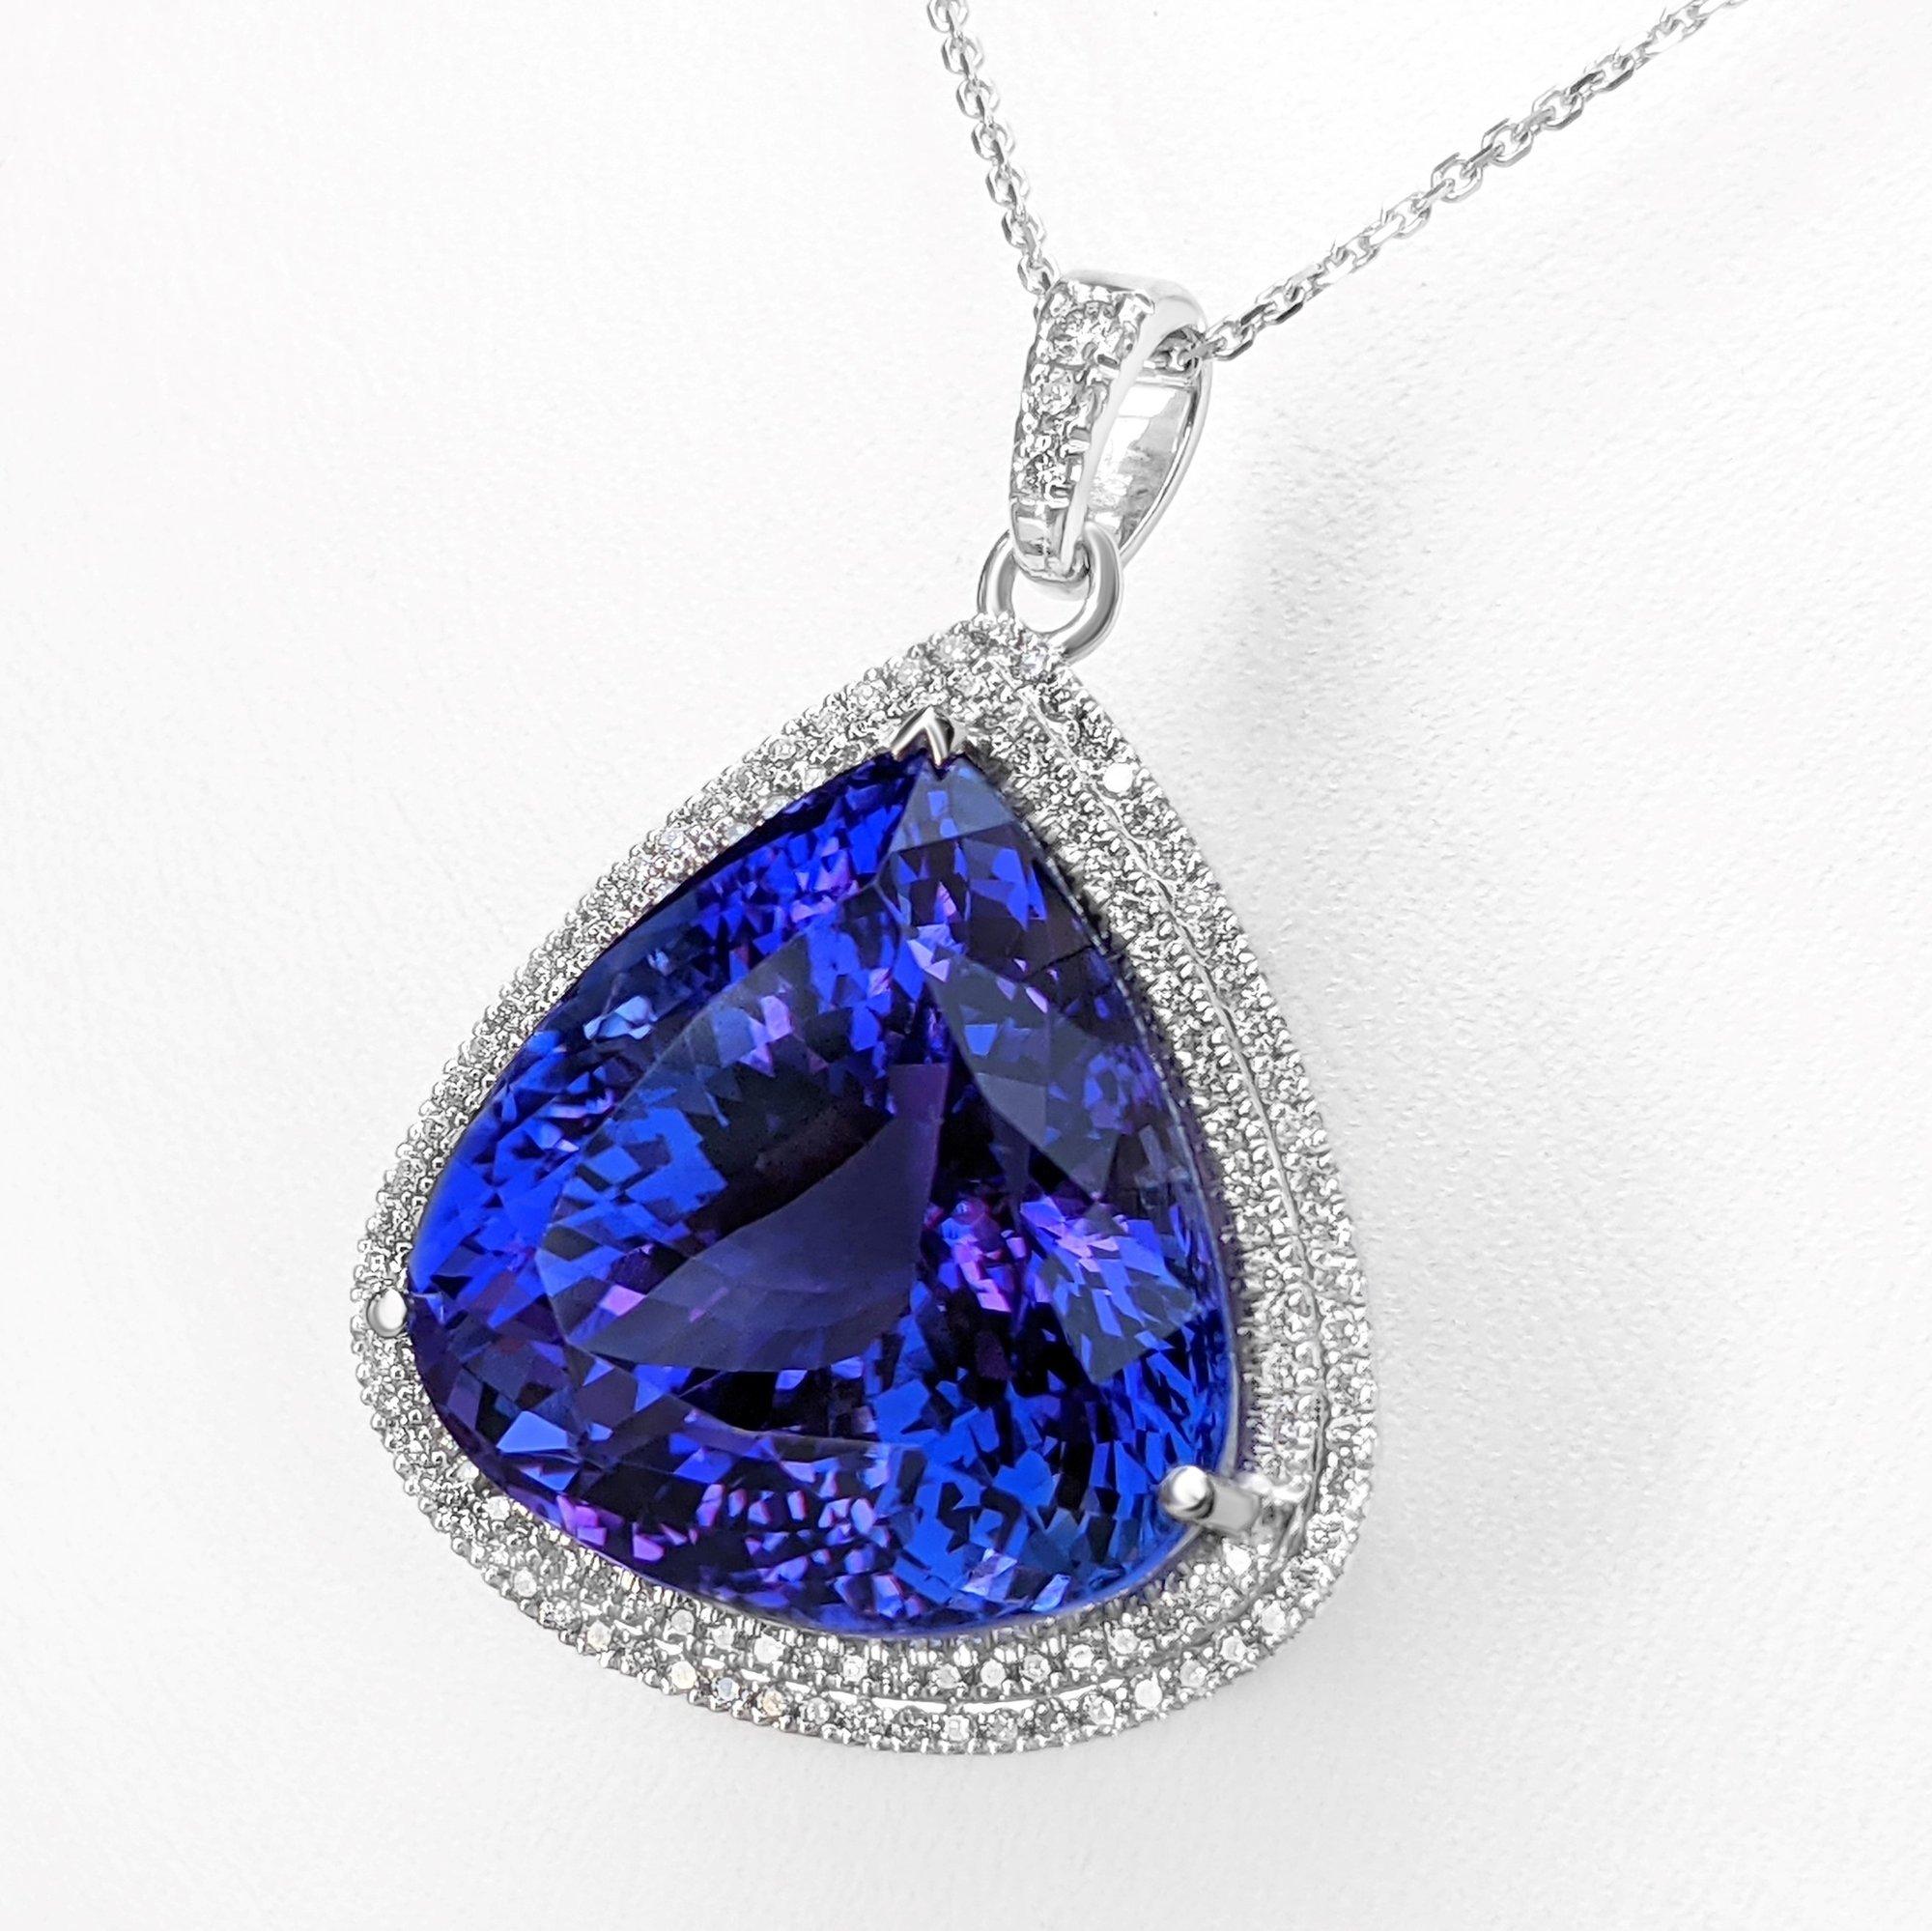 18 kt. White gold
Necklace with pendant
Size: 40 cm 
Total weight: 15.42 g (gold + stones)

Center Tanzanite Stone:
Weight:  36.78 cttw
Color: Violetish blue
Shape: Pear Mixed
Gemstones are commonly treated to enhance colour or clarity. This has not